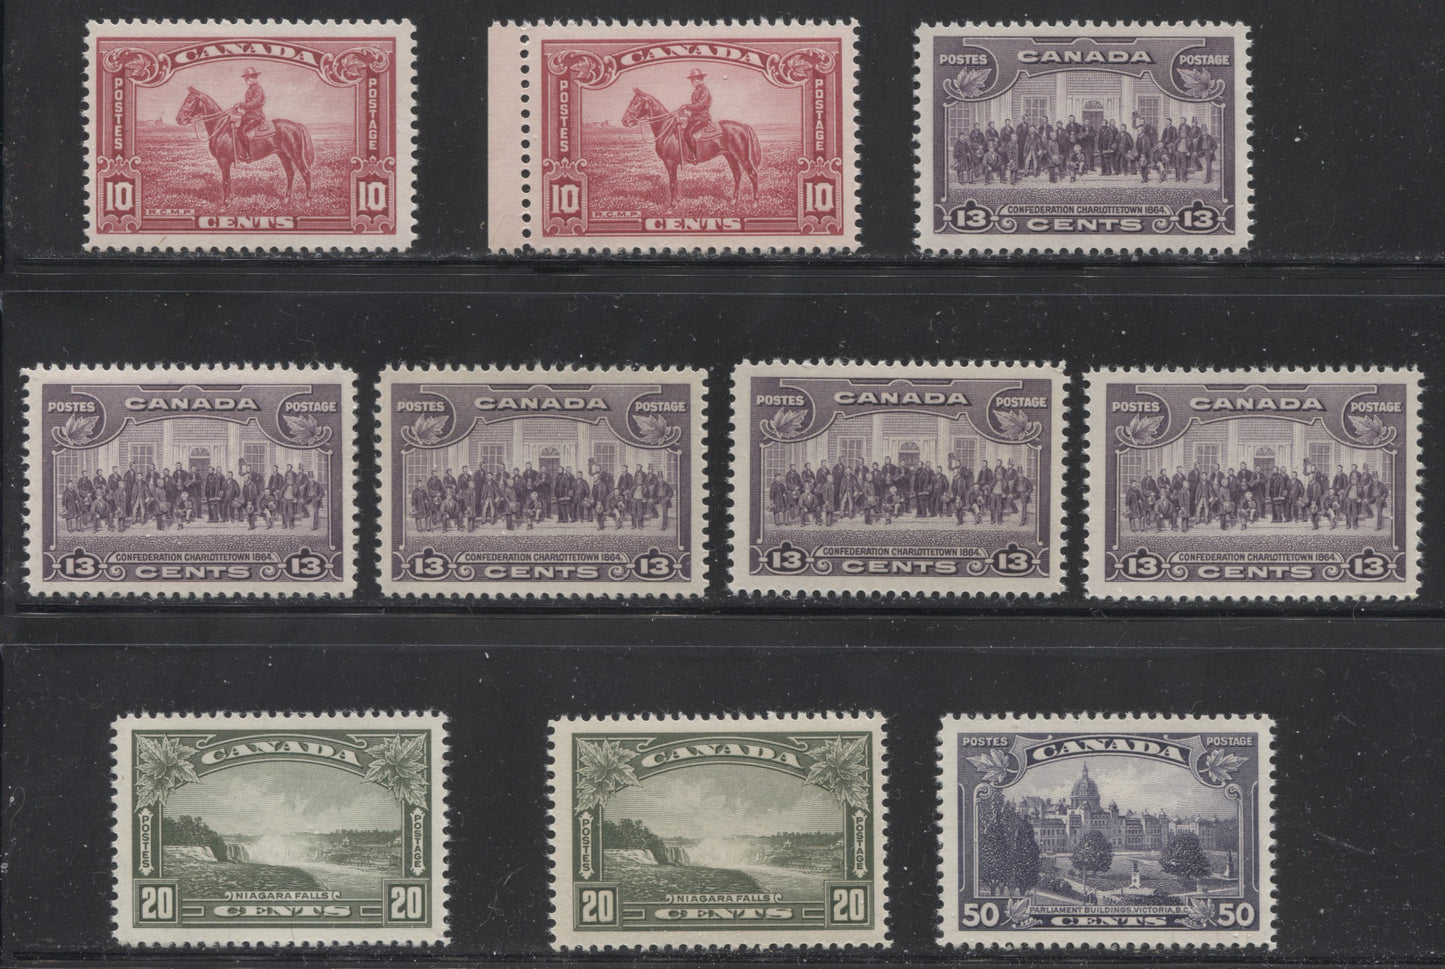 Canada #223-226 1935-1937 Dated Die Issue - Specialized Lot of 10 Mostly All VF NH High Value Stamps Brixton Chrome 